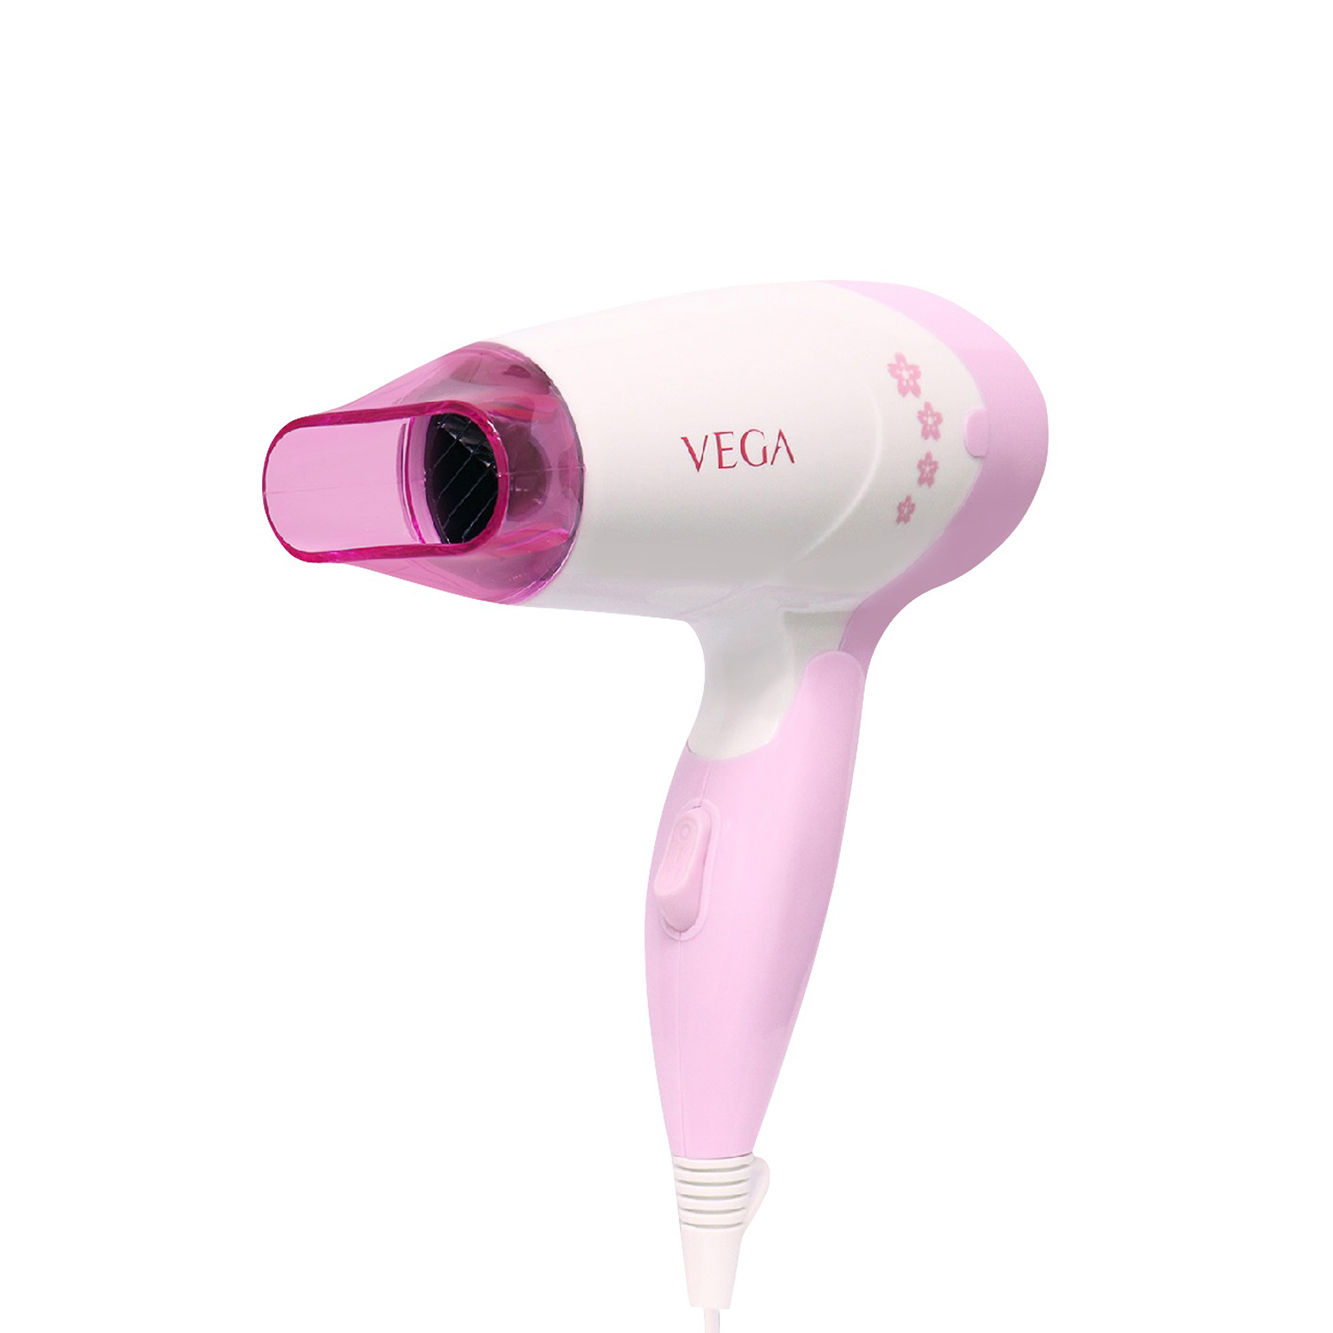 1000 W ABS Nova NV1290 Electric Hair Dryer at Rs 95piece in New Delhi   ID 22468758673